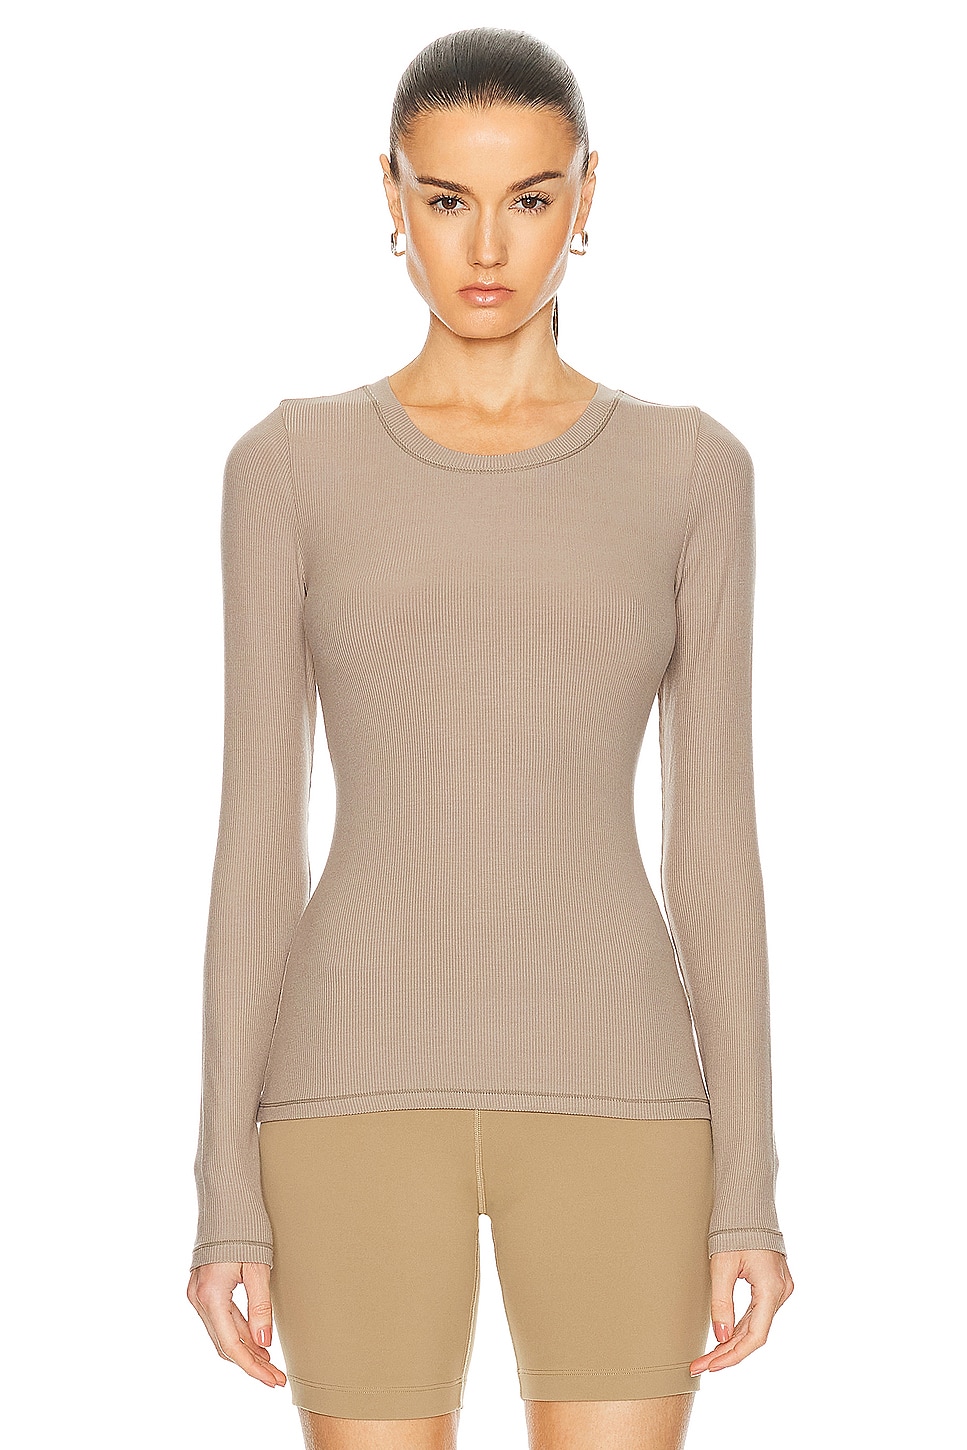 Tammy Long Sleeve Top in Taupe